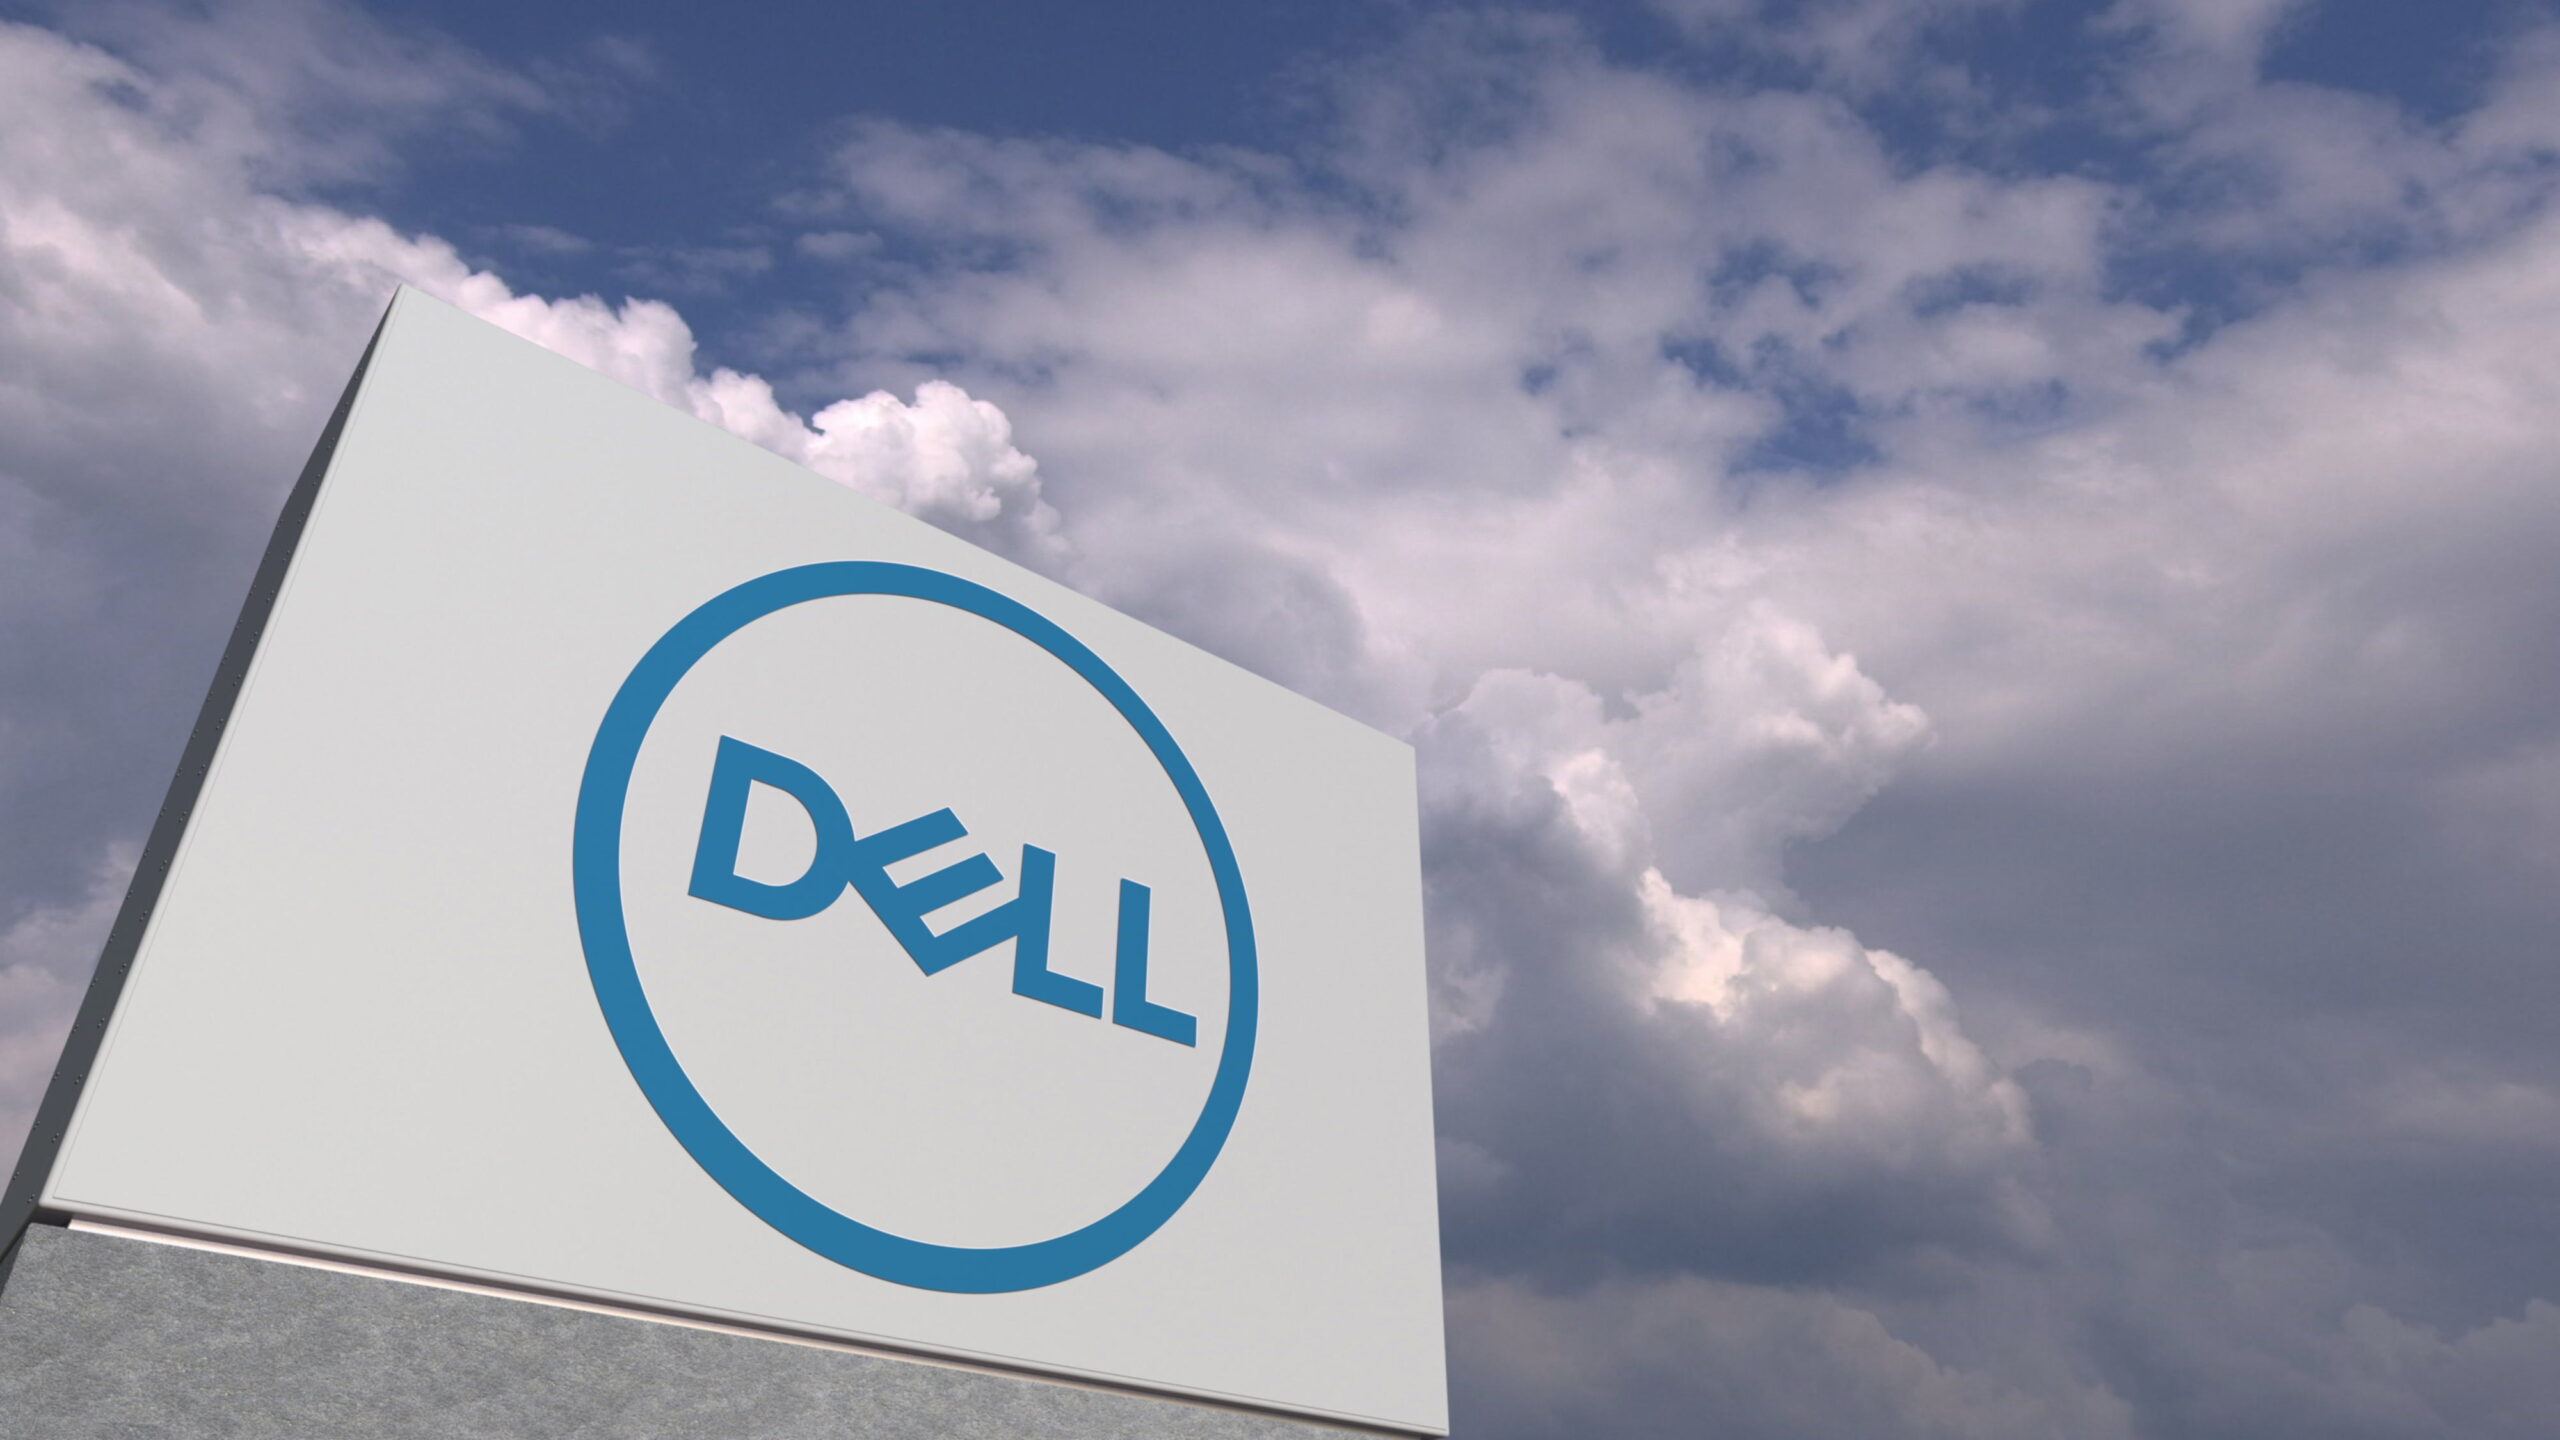 Dell company logo made against sky background, conceptual editorial 3D